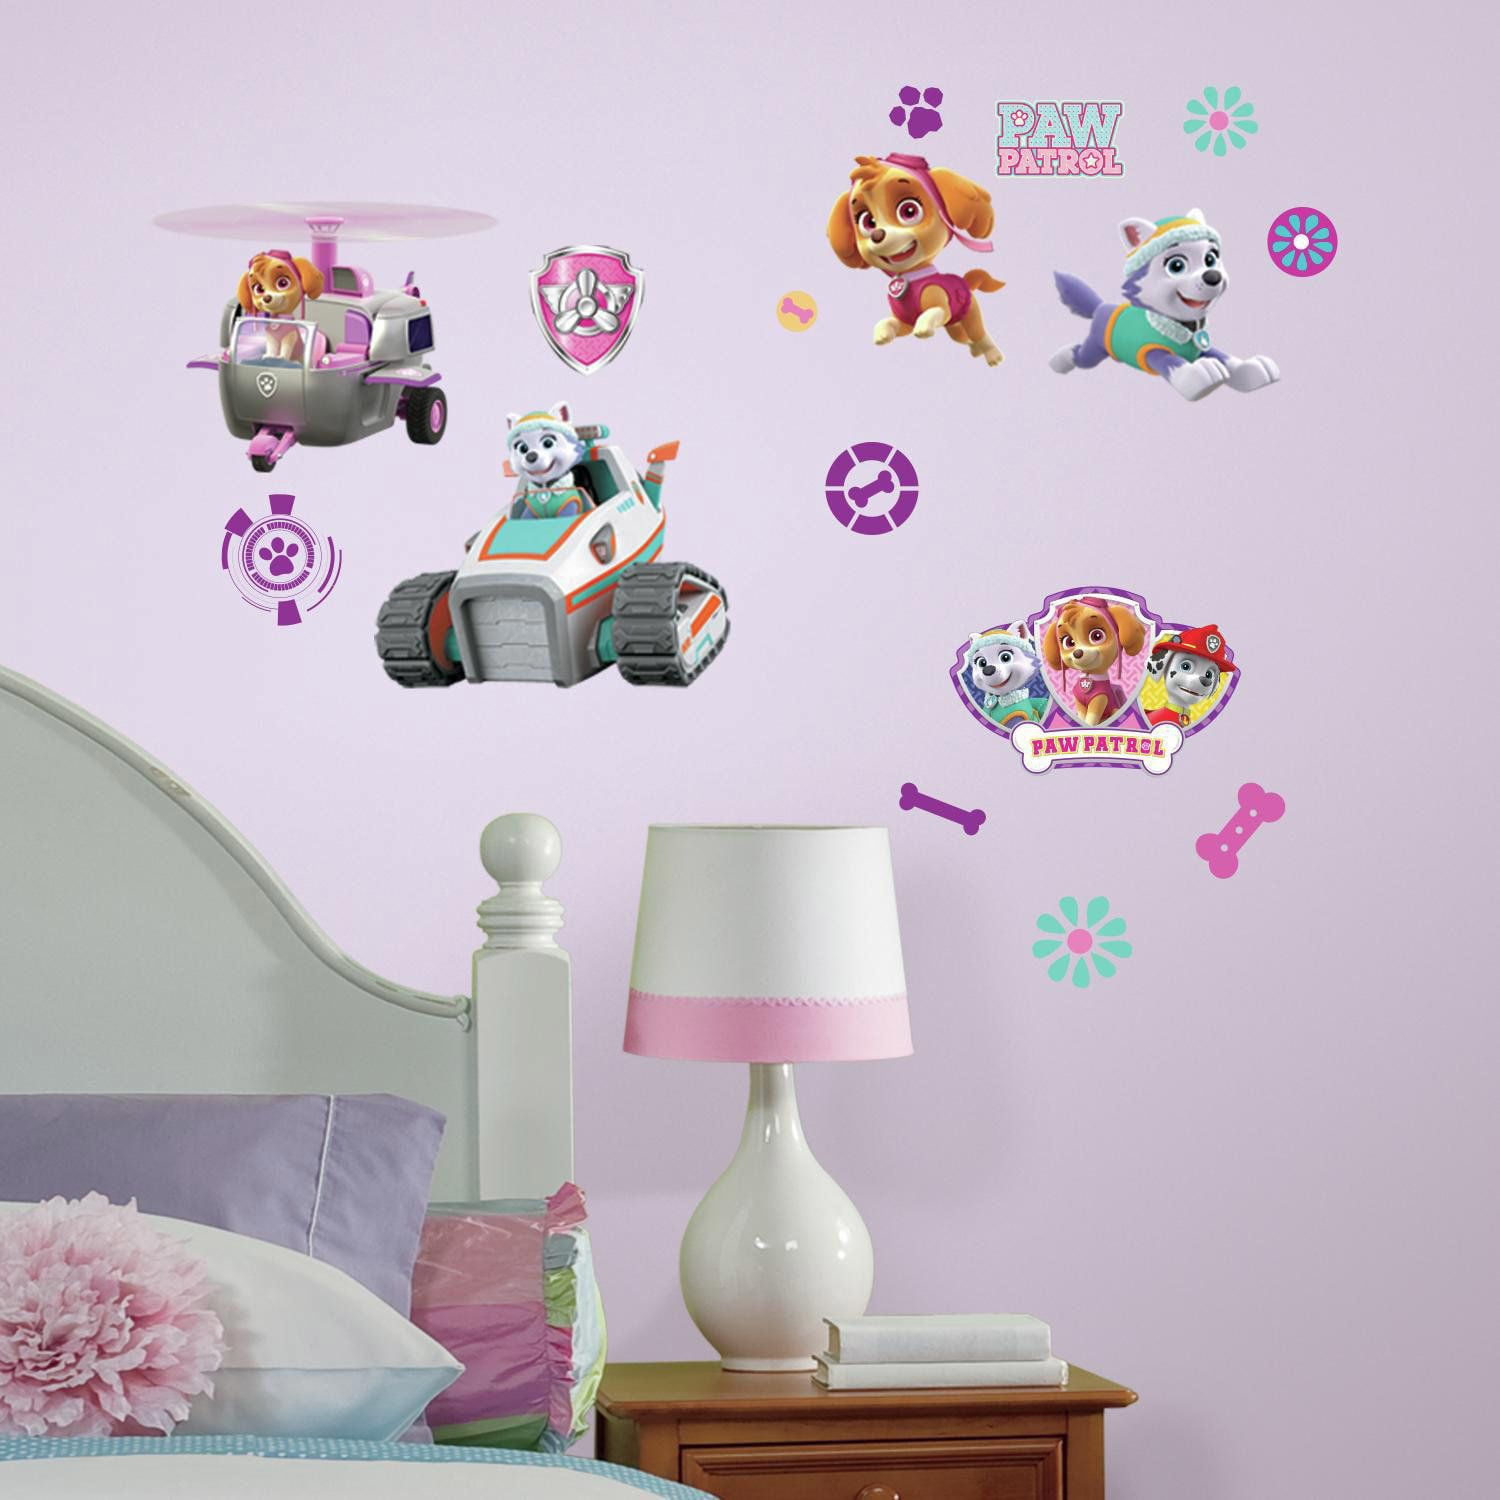 Paw Patrol Characters Wall Art Sticker High Quality Bedroom Decal Print 